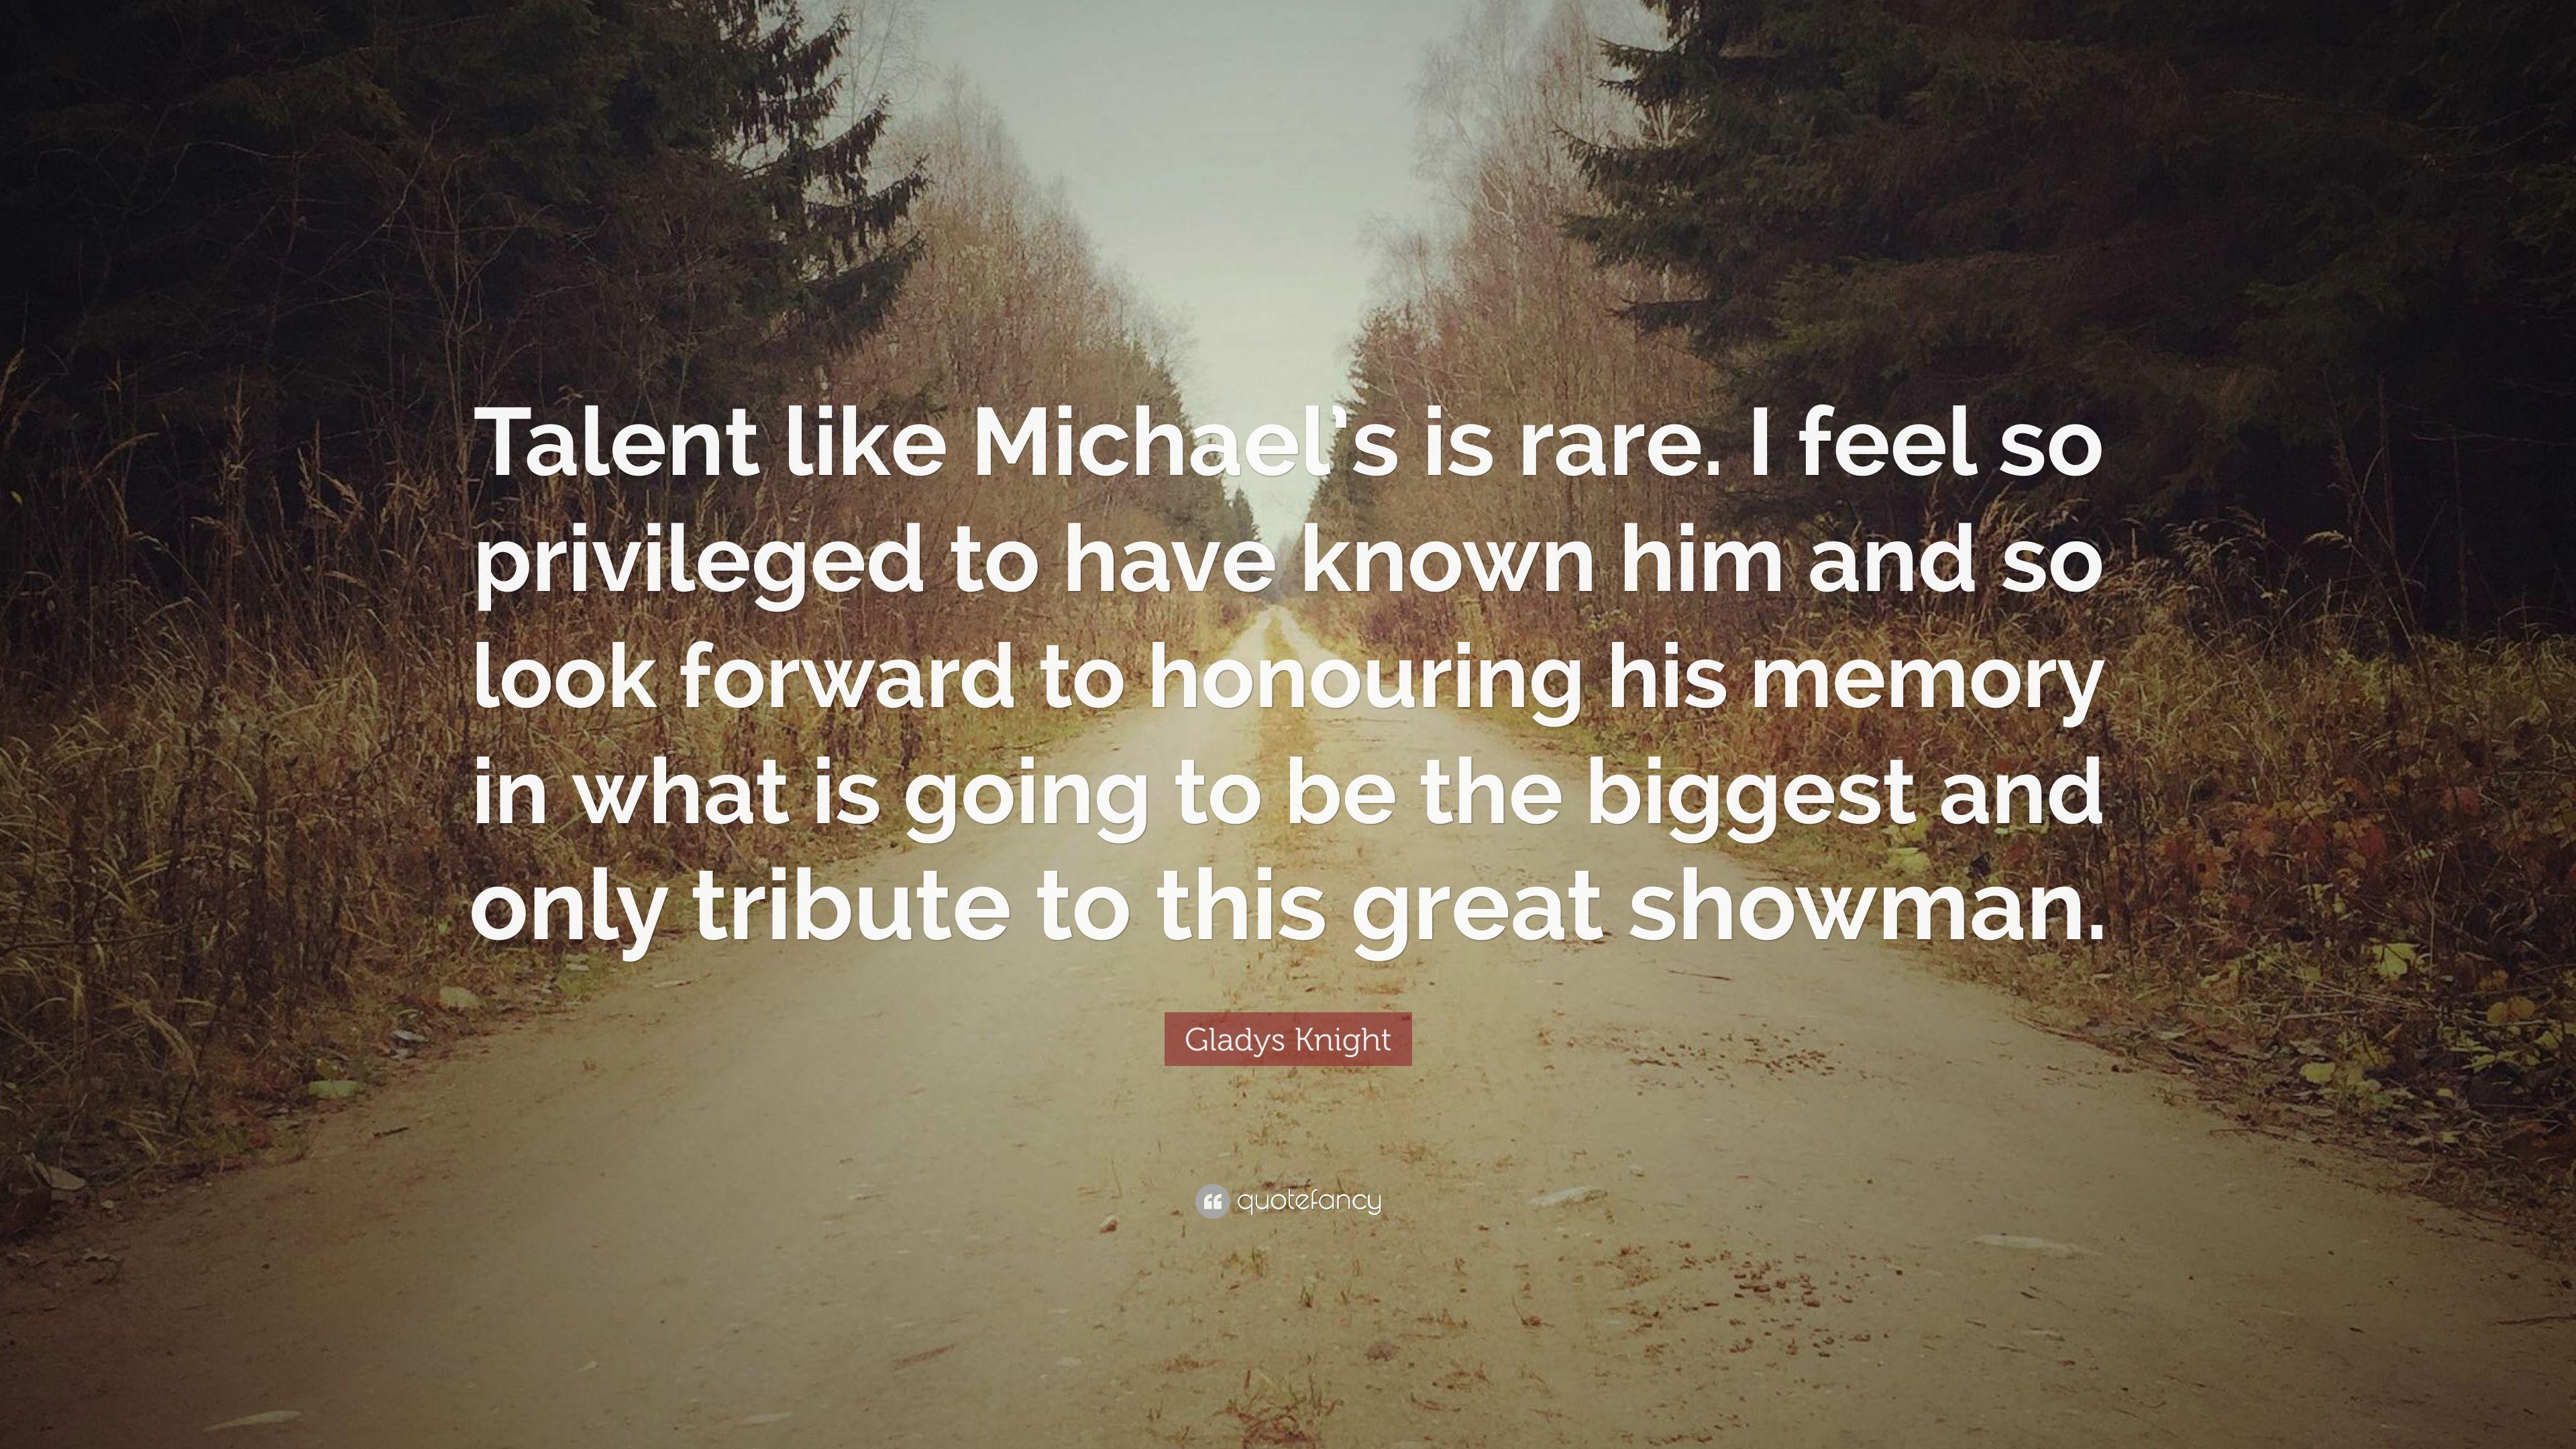 Gladys Knight Quote: “Talent like Michael's is rare. I feel so